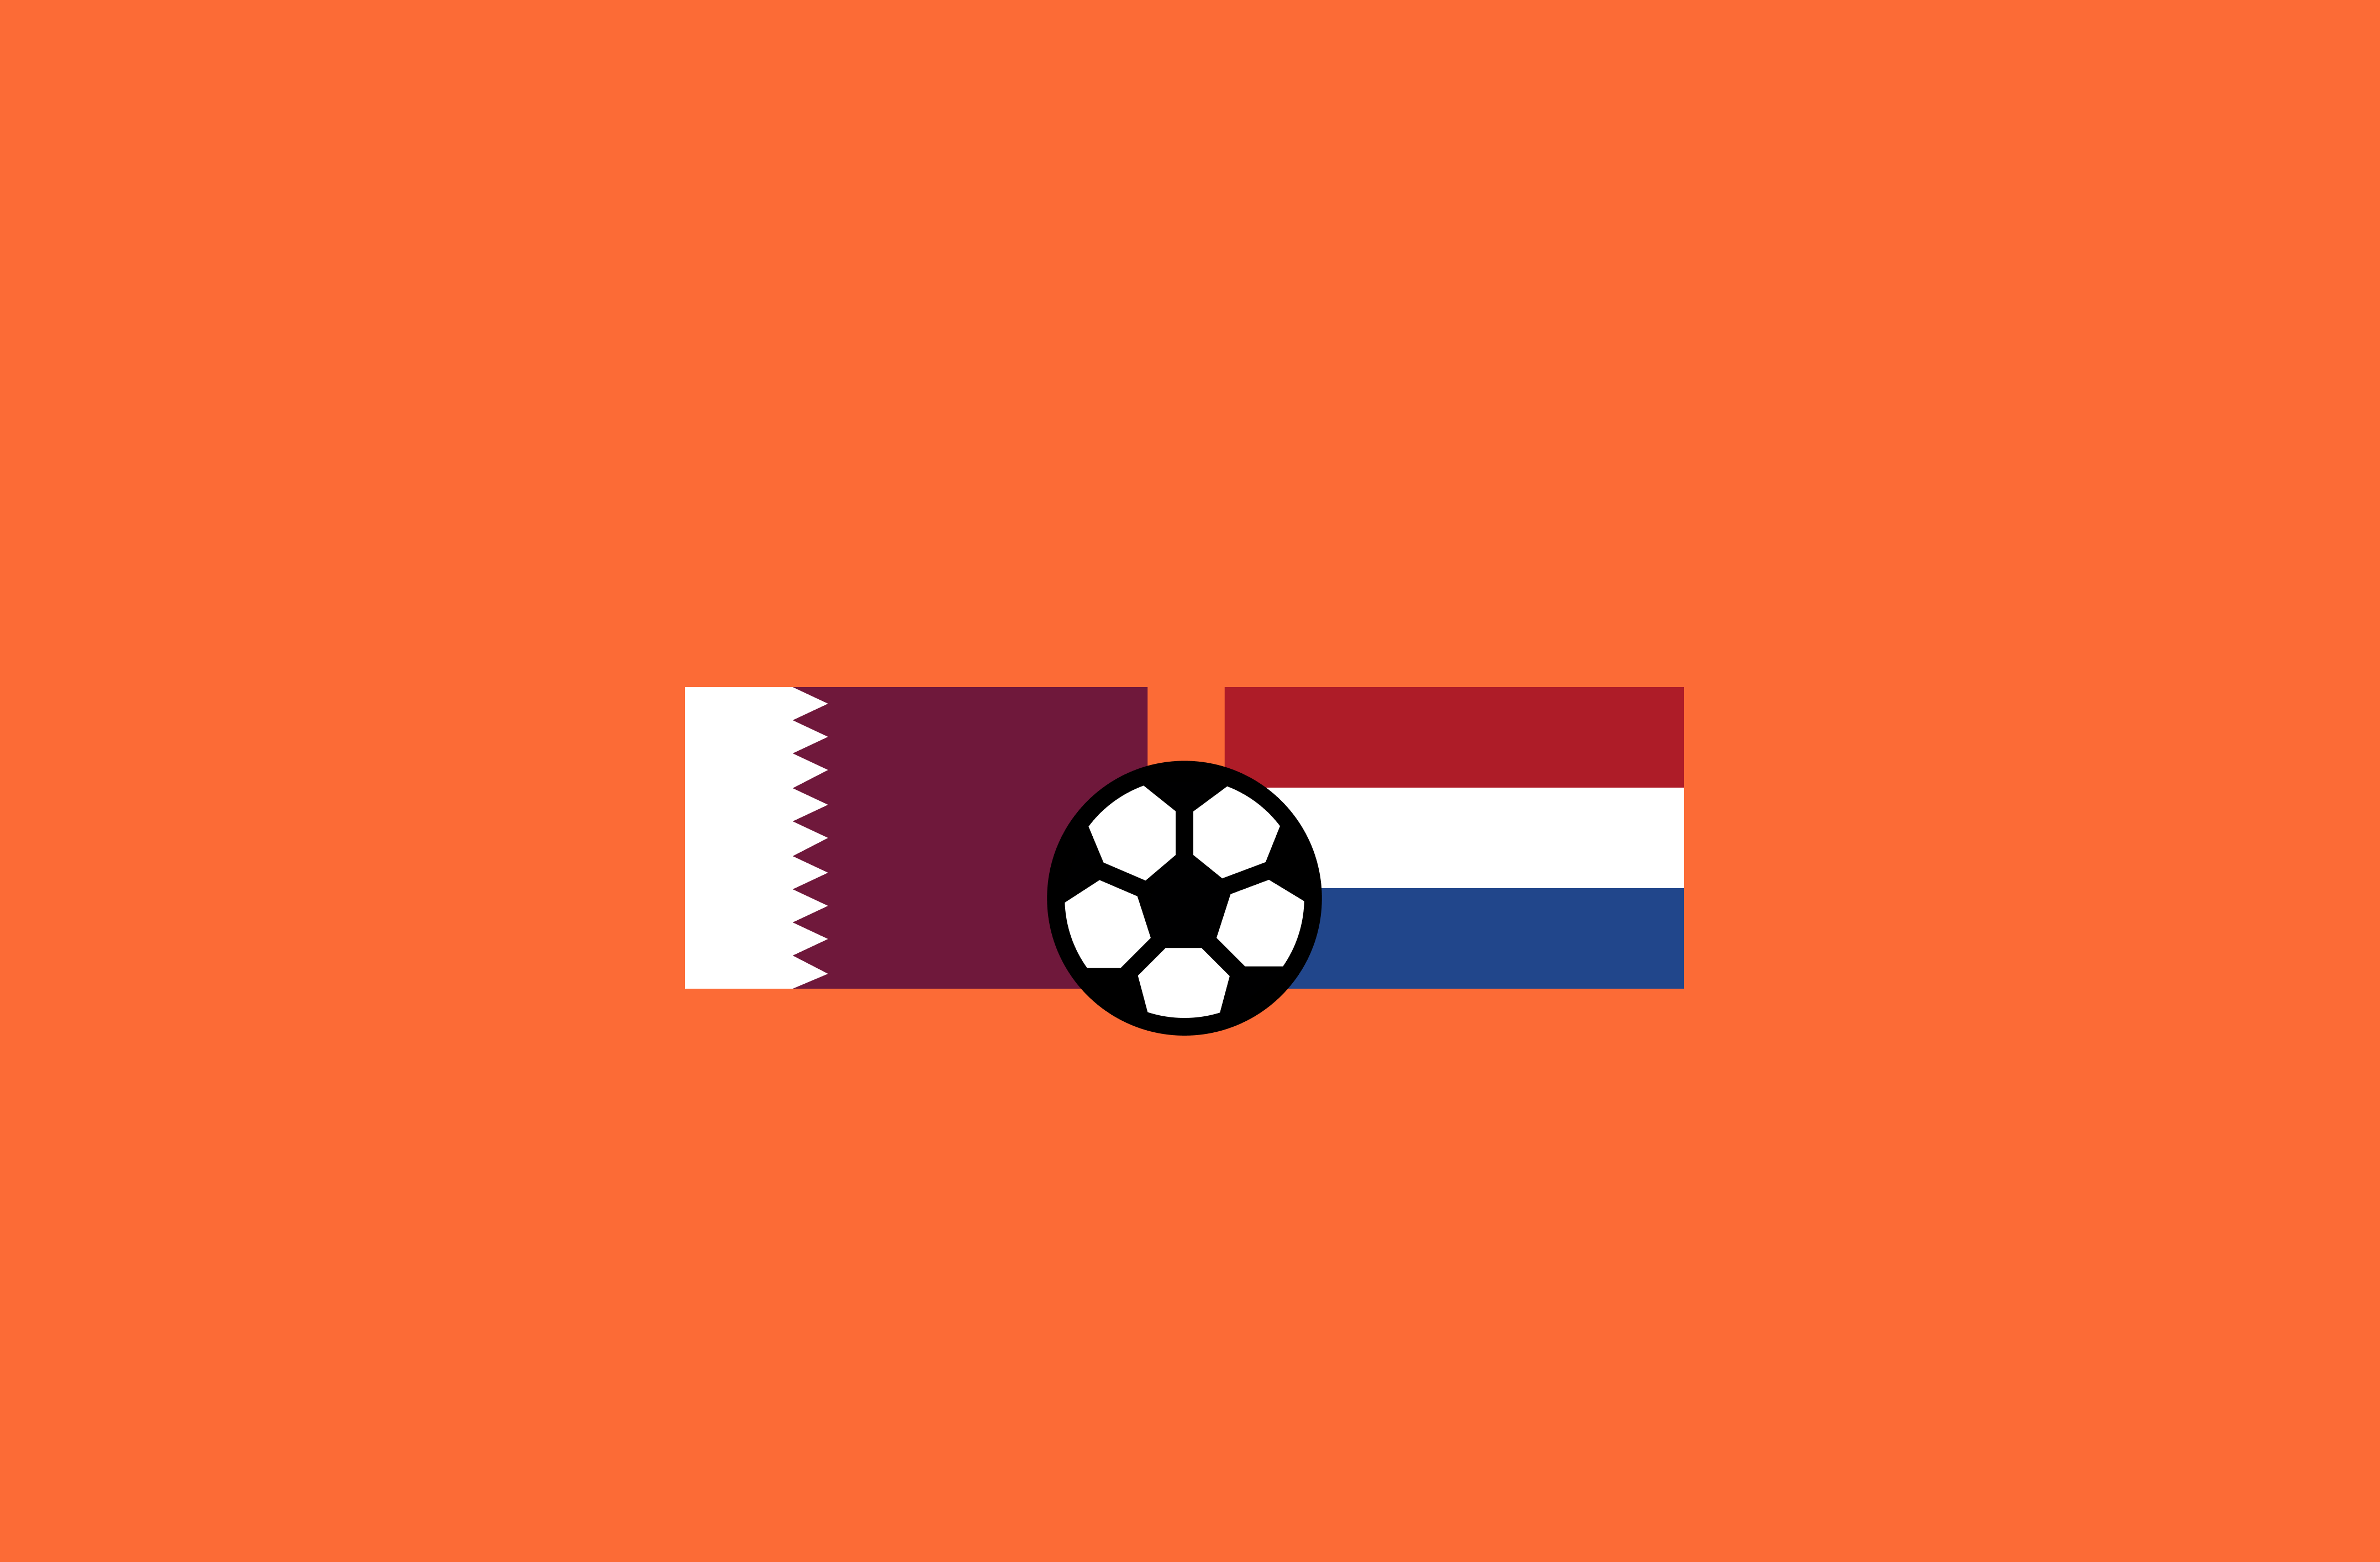 World Cup match between the Netherlands and Qatar